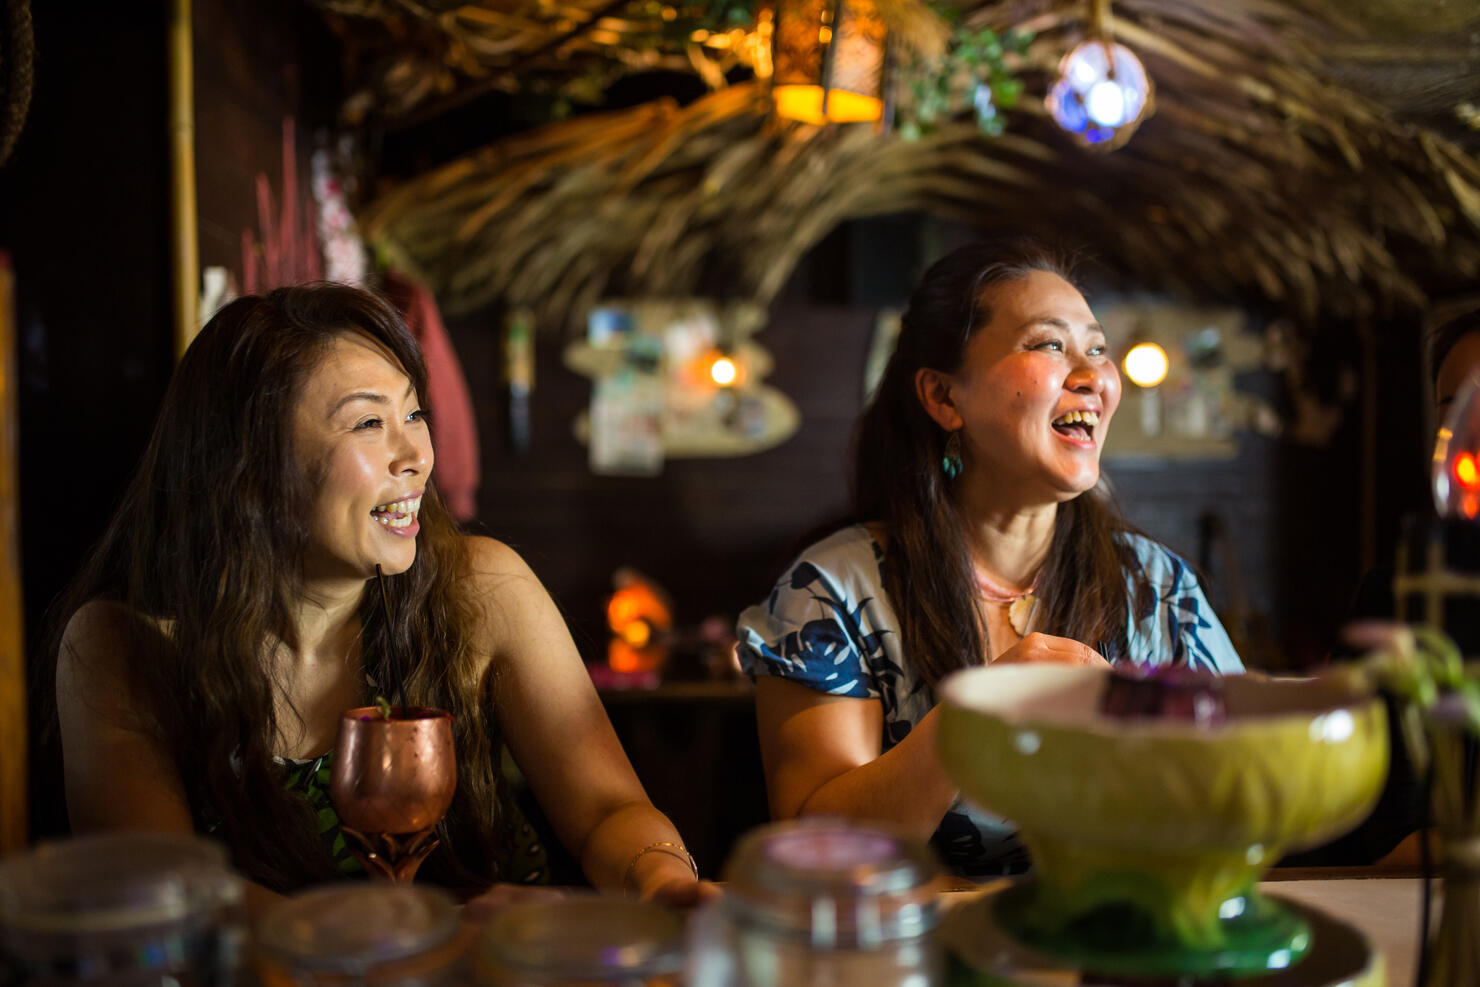 People drinking and enjoying themselves in a tropical themed restaurant or bar